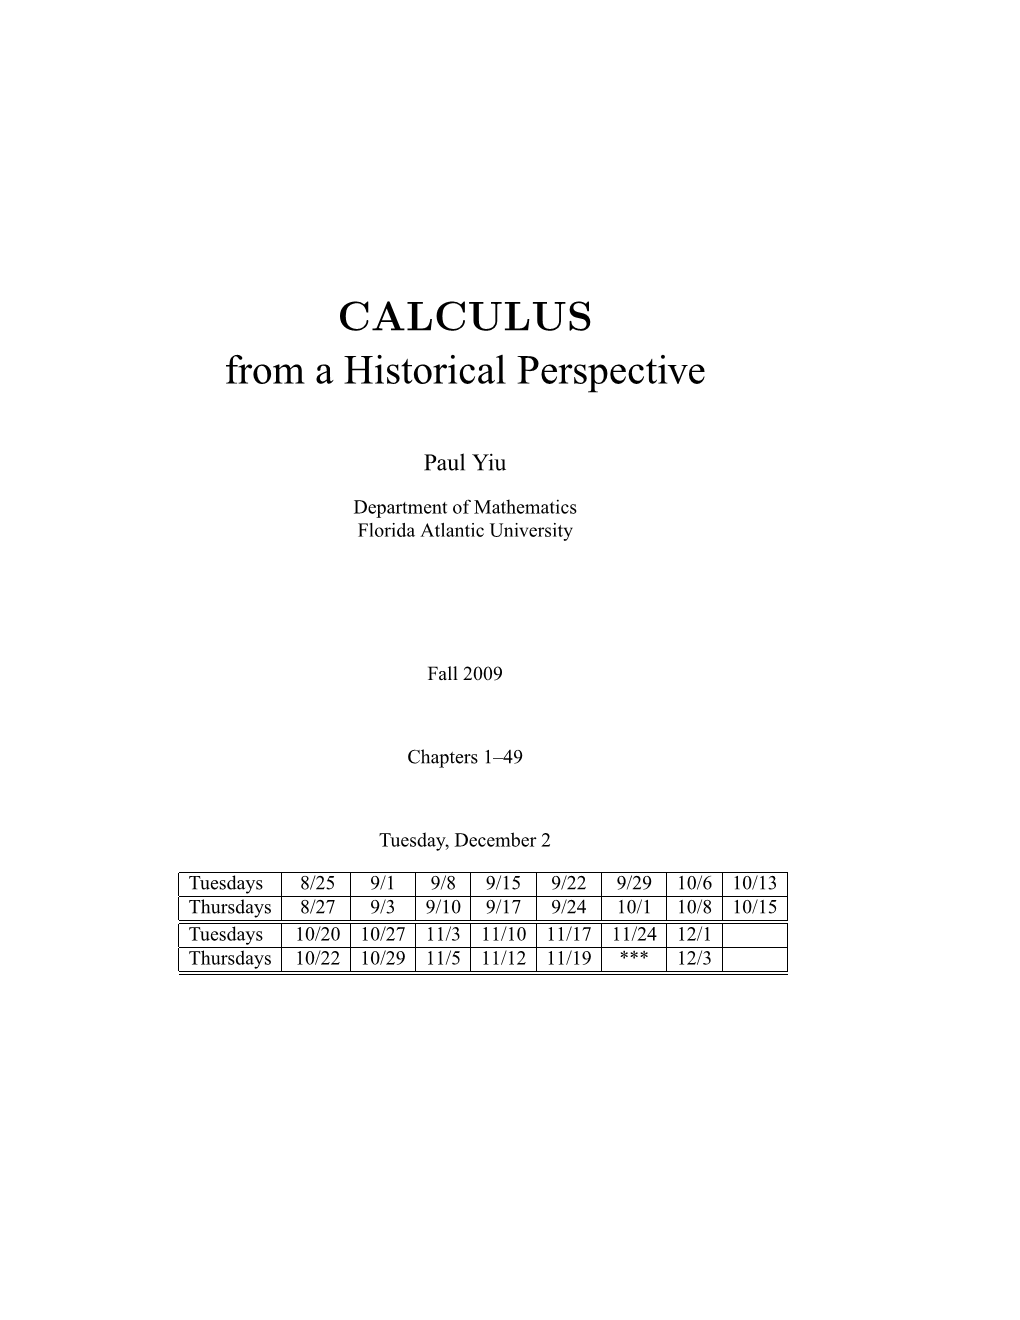 CALCULUS from a Historical Perspective